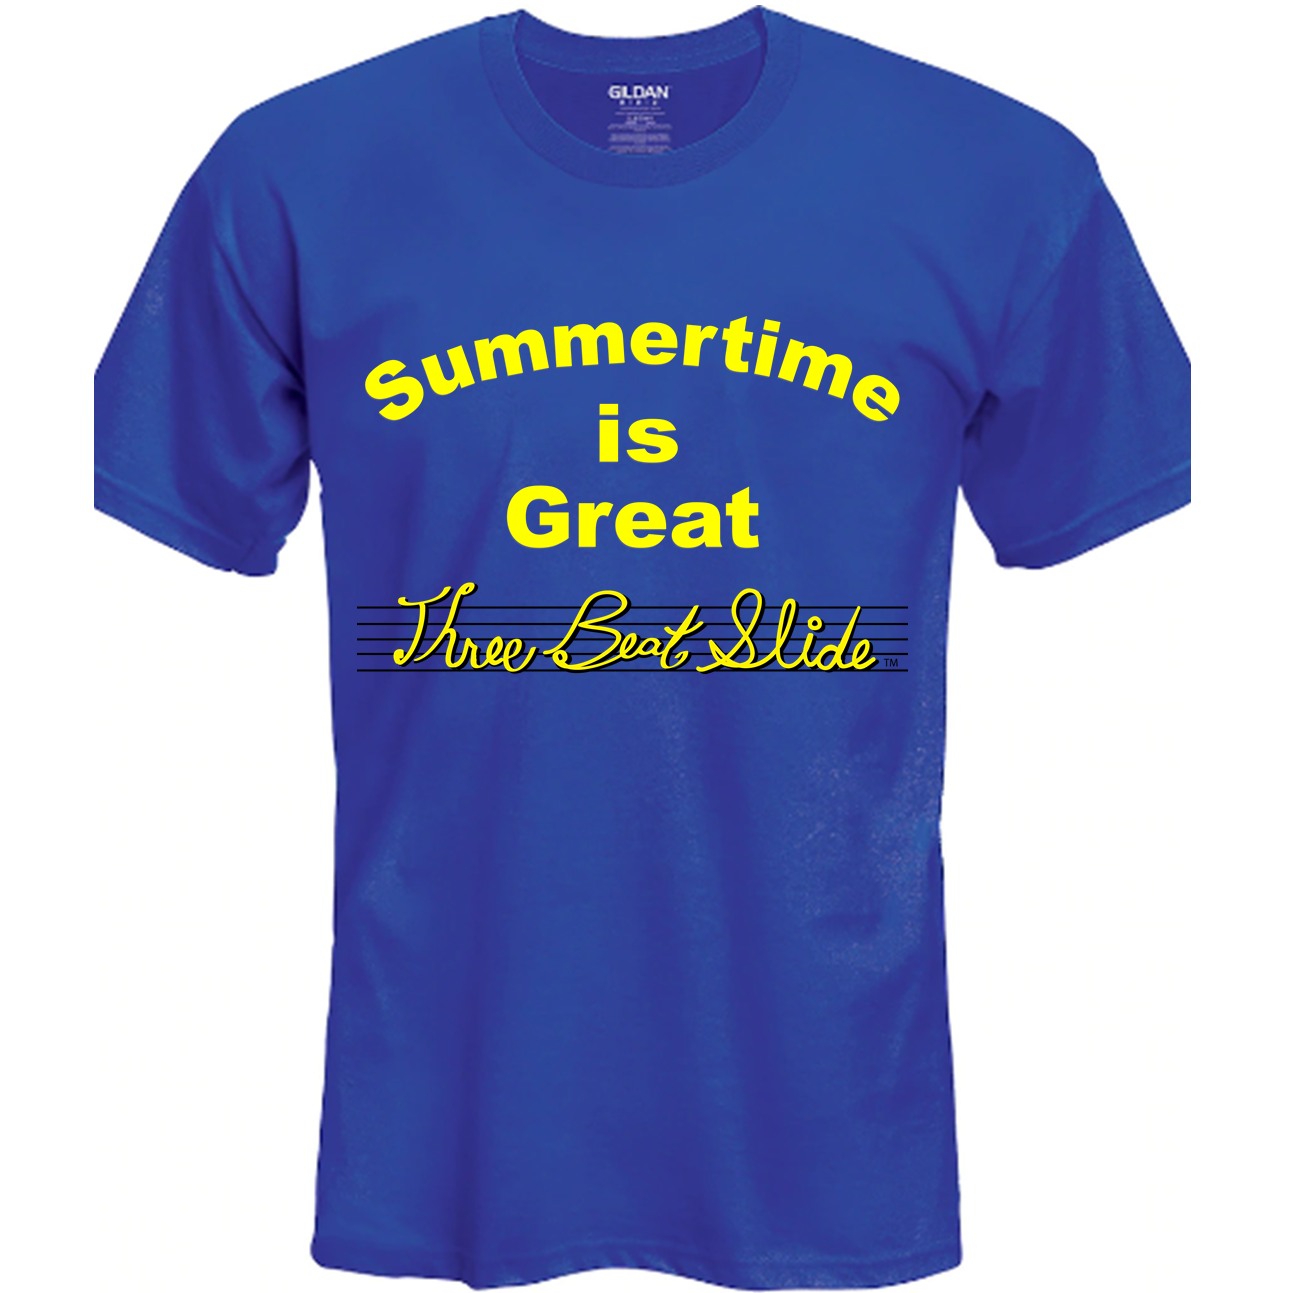 Summertime is Great T-Shirt